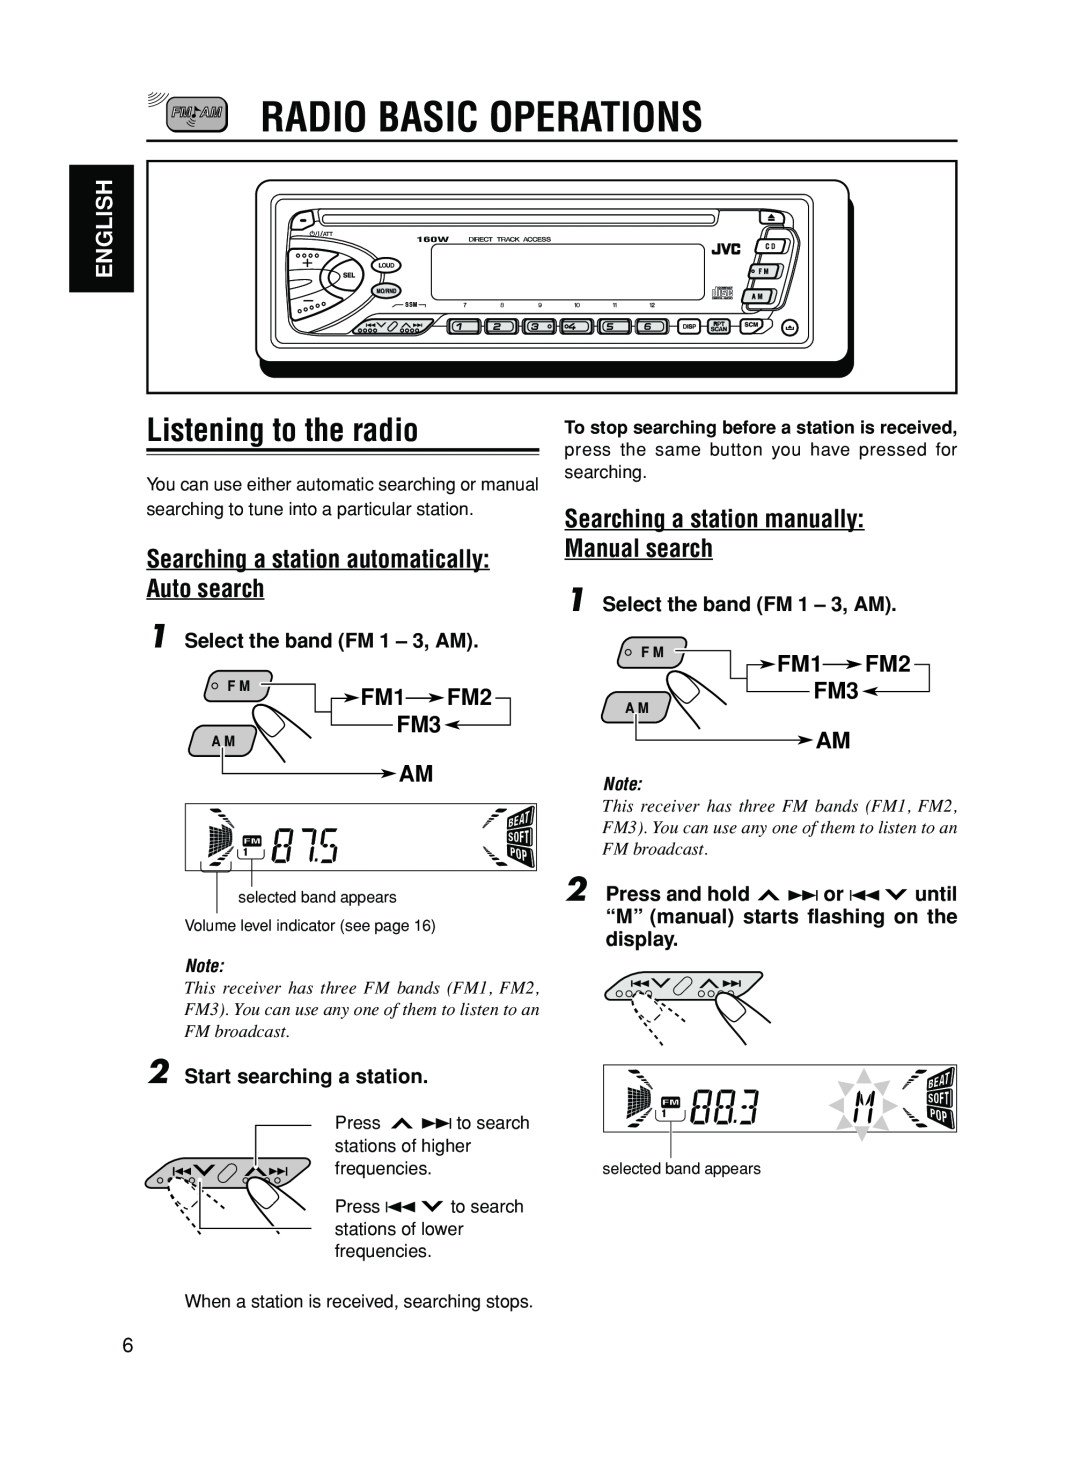 JVC KD-S50 Radio Basic Operations, Listening to the radio, Searching a station automatically Auto search, FM1FM2, FM3 AM 